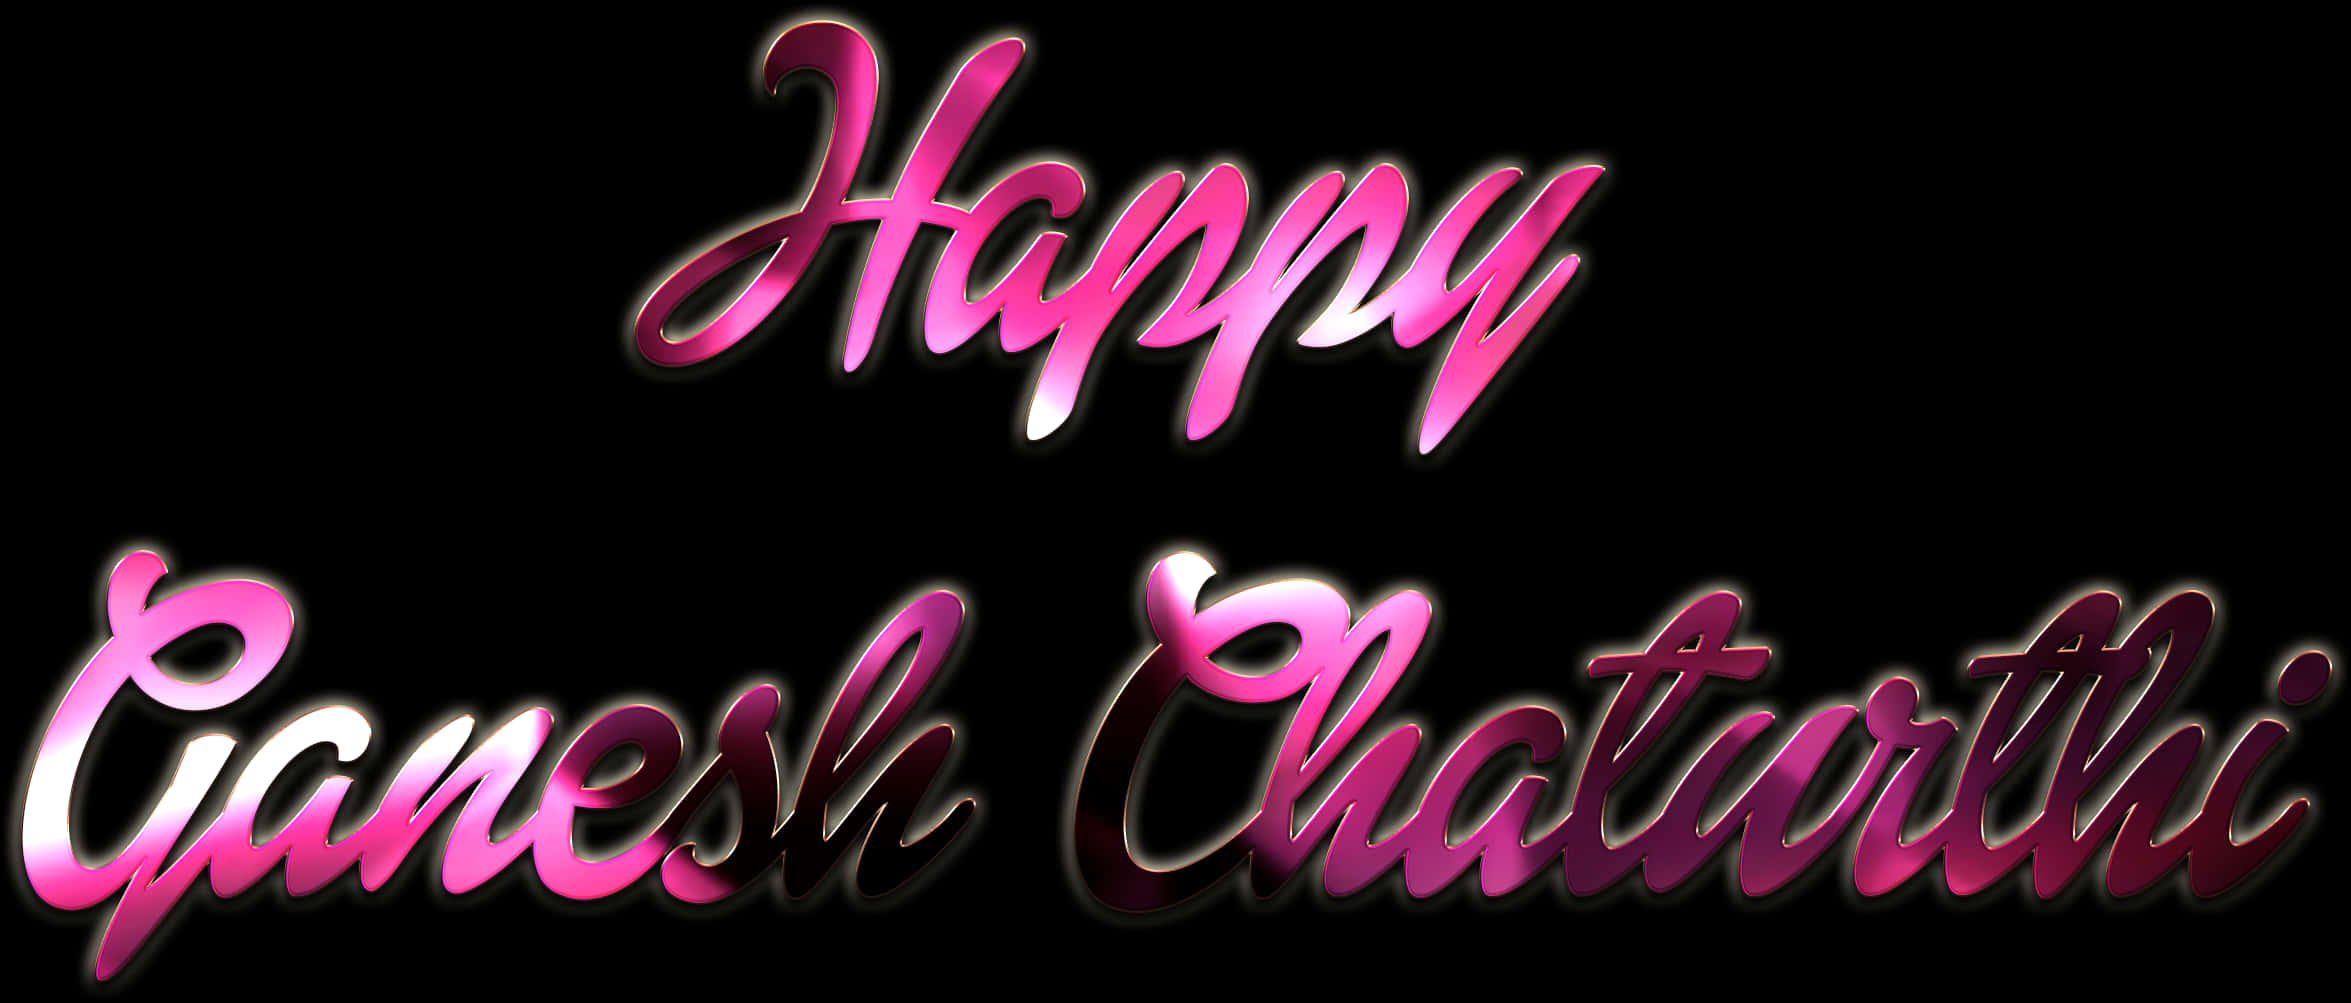 Happy Ganesh Chaturthi Text Graphic PNG